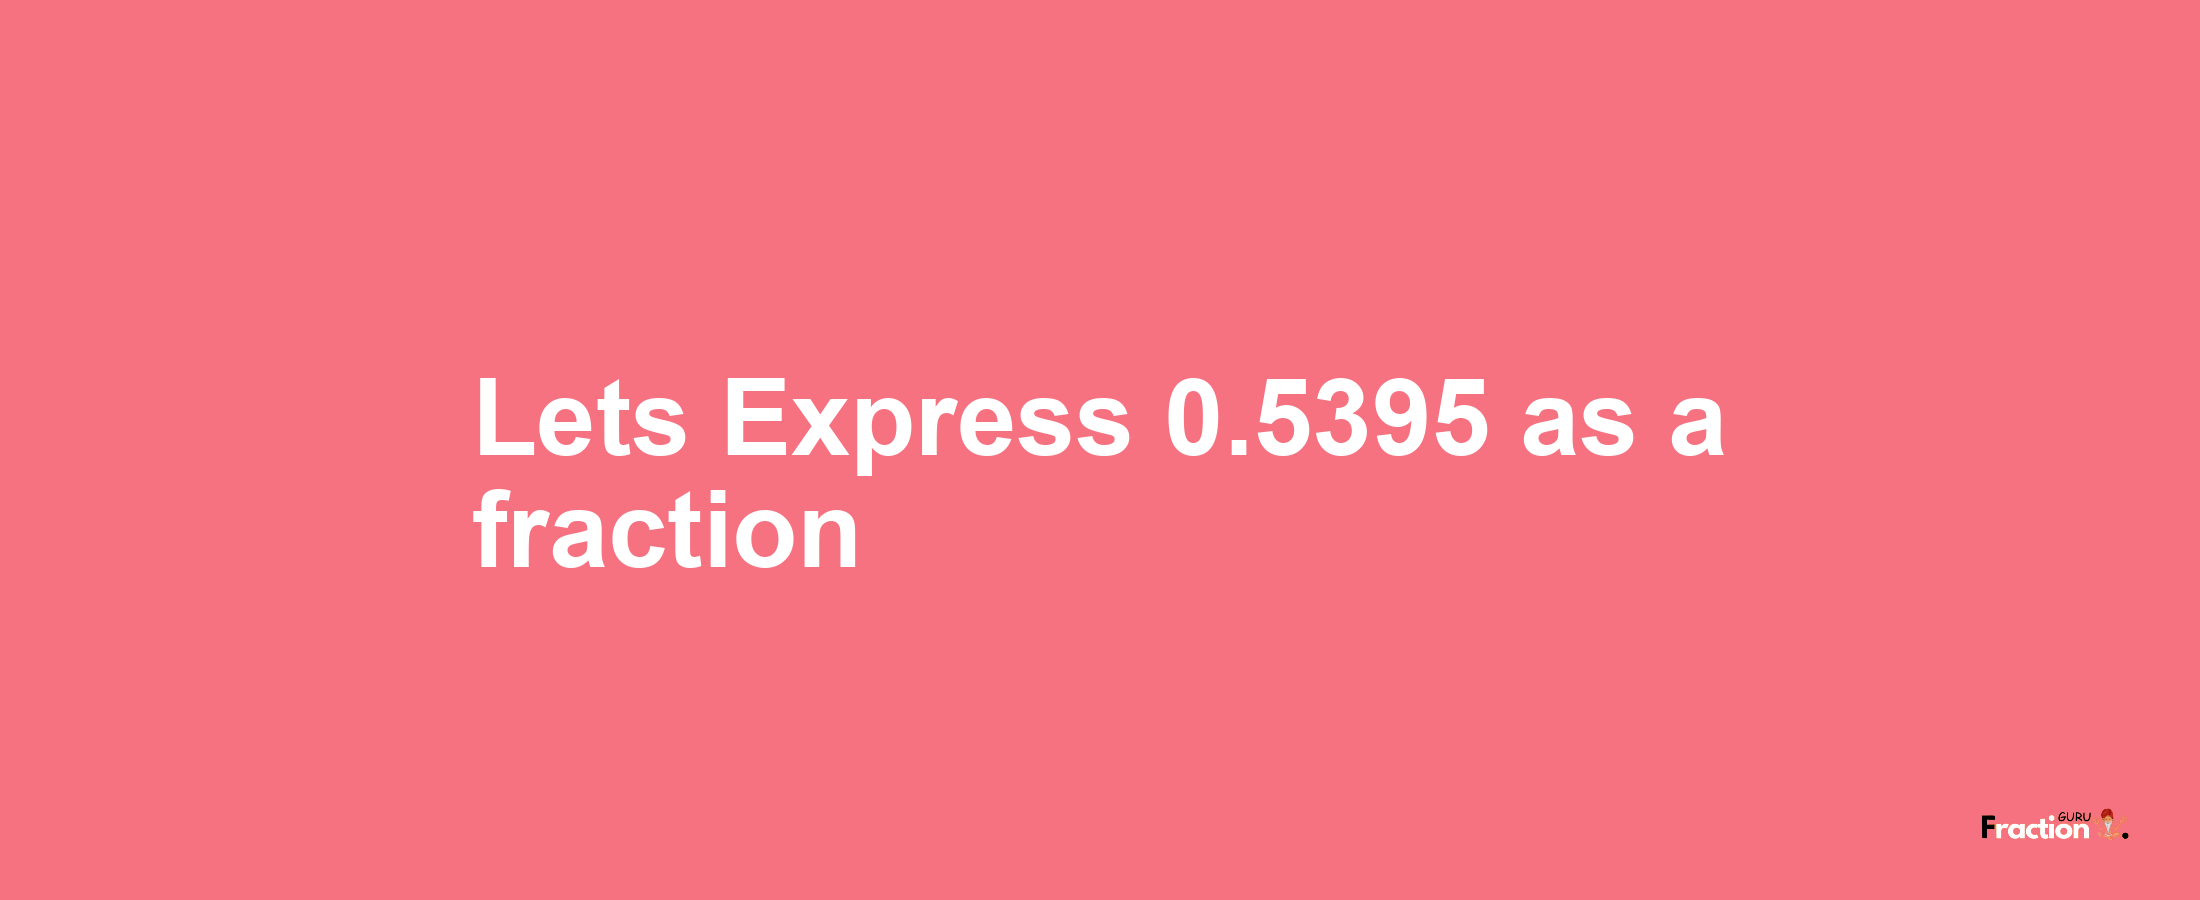 Lets Express 0.5395 as afraction